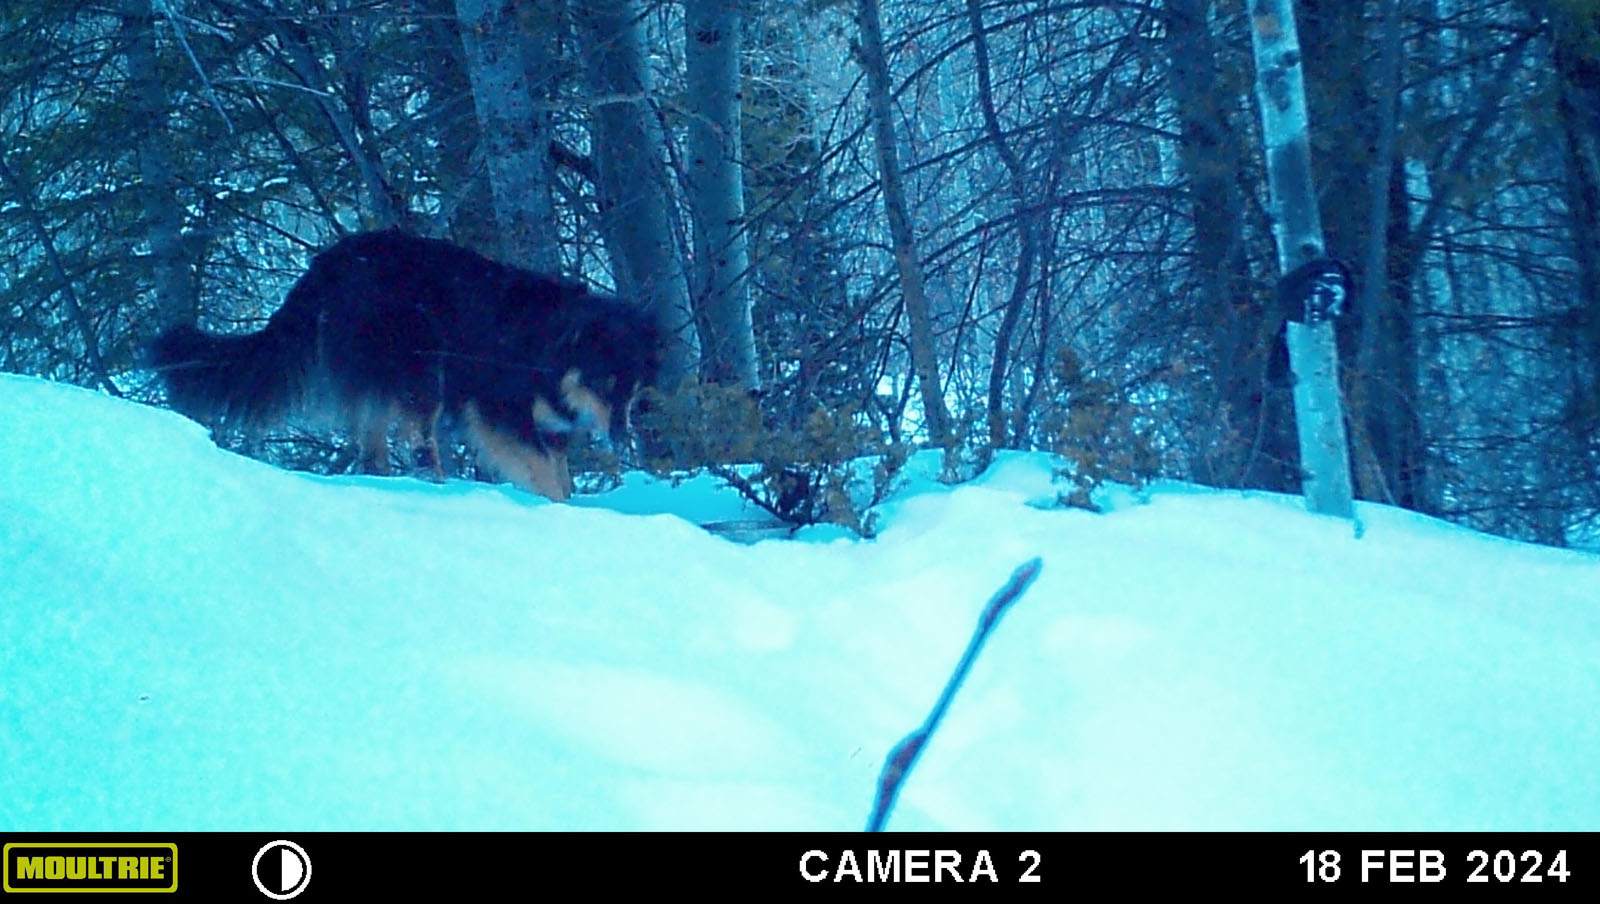 Lost dog found on trail camera in Colorado after being missing since last March 